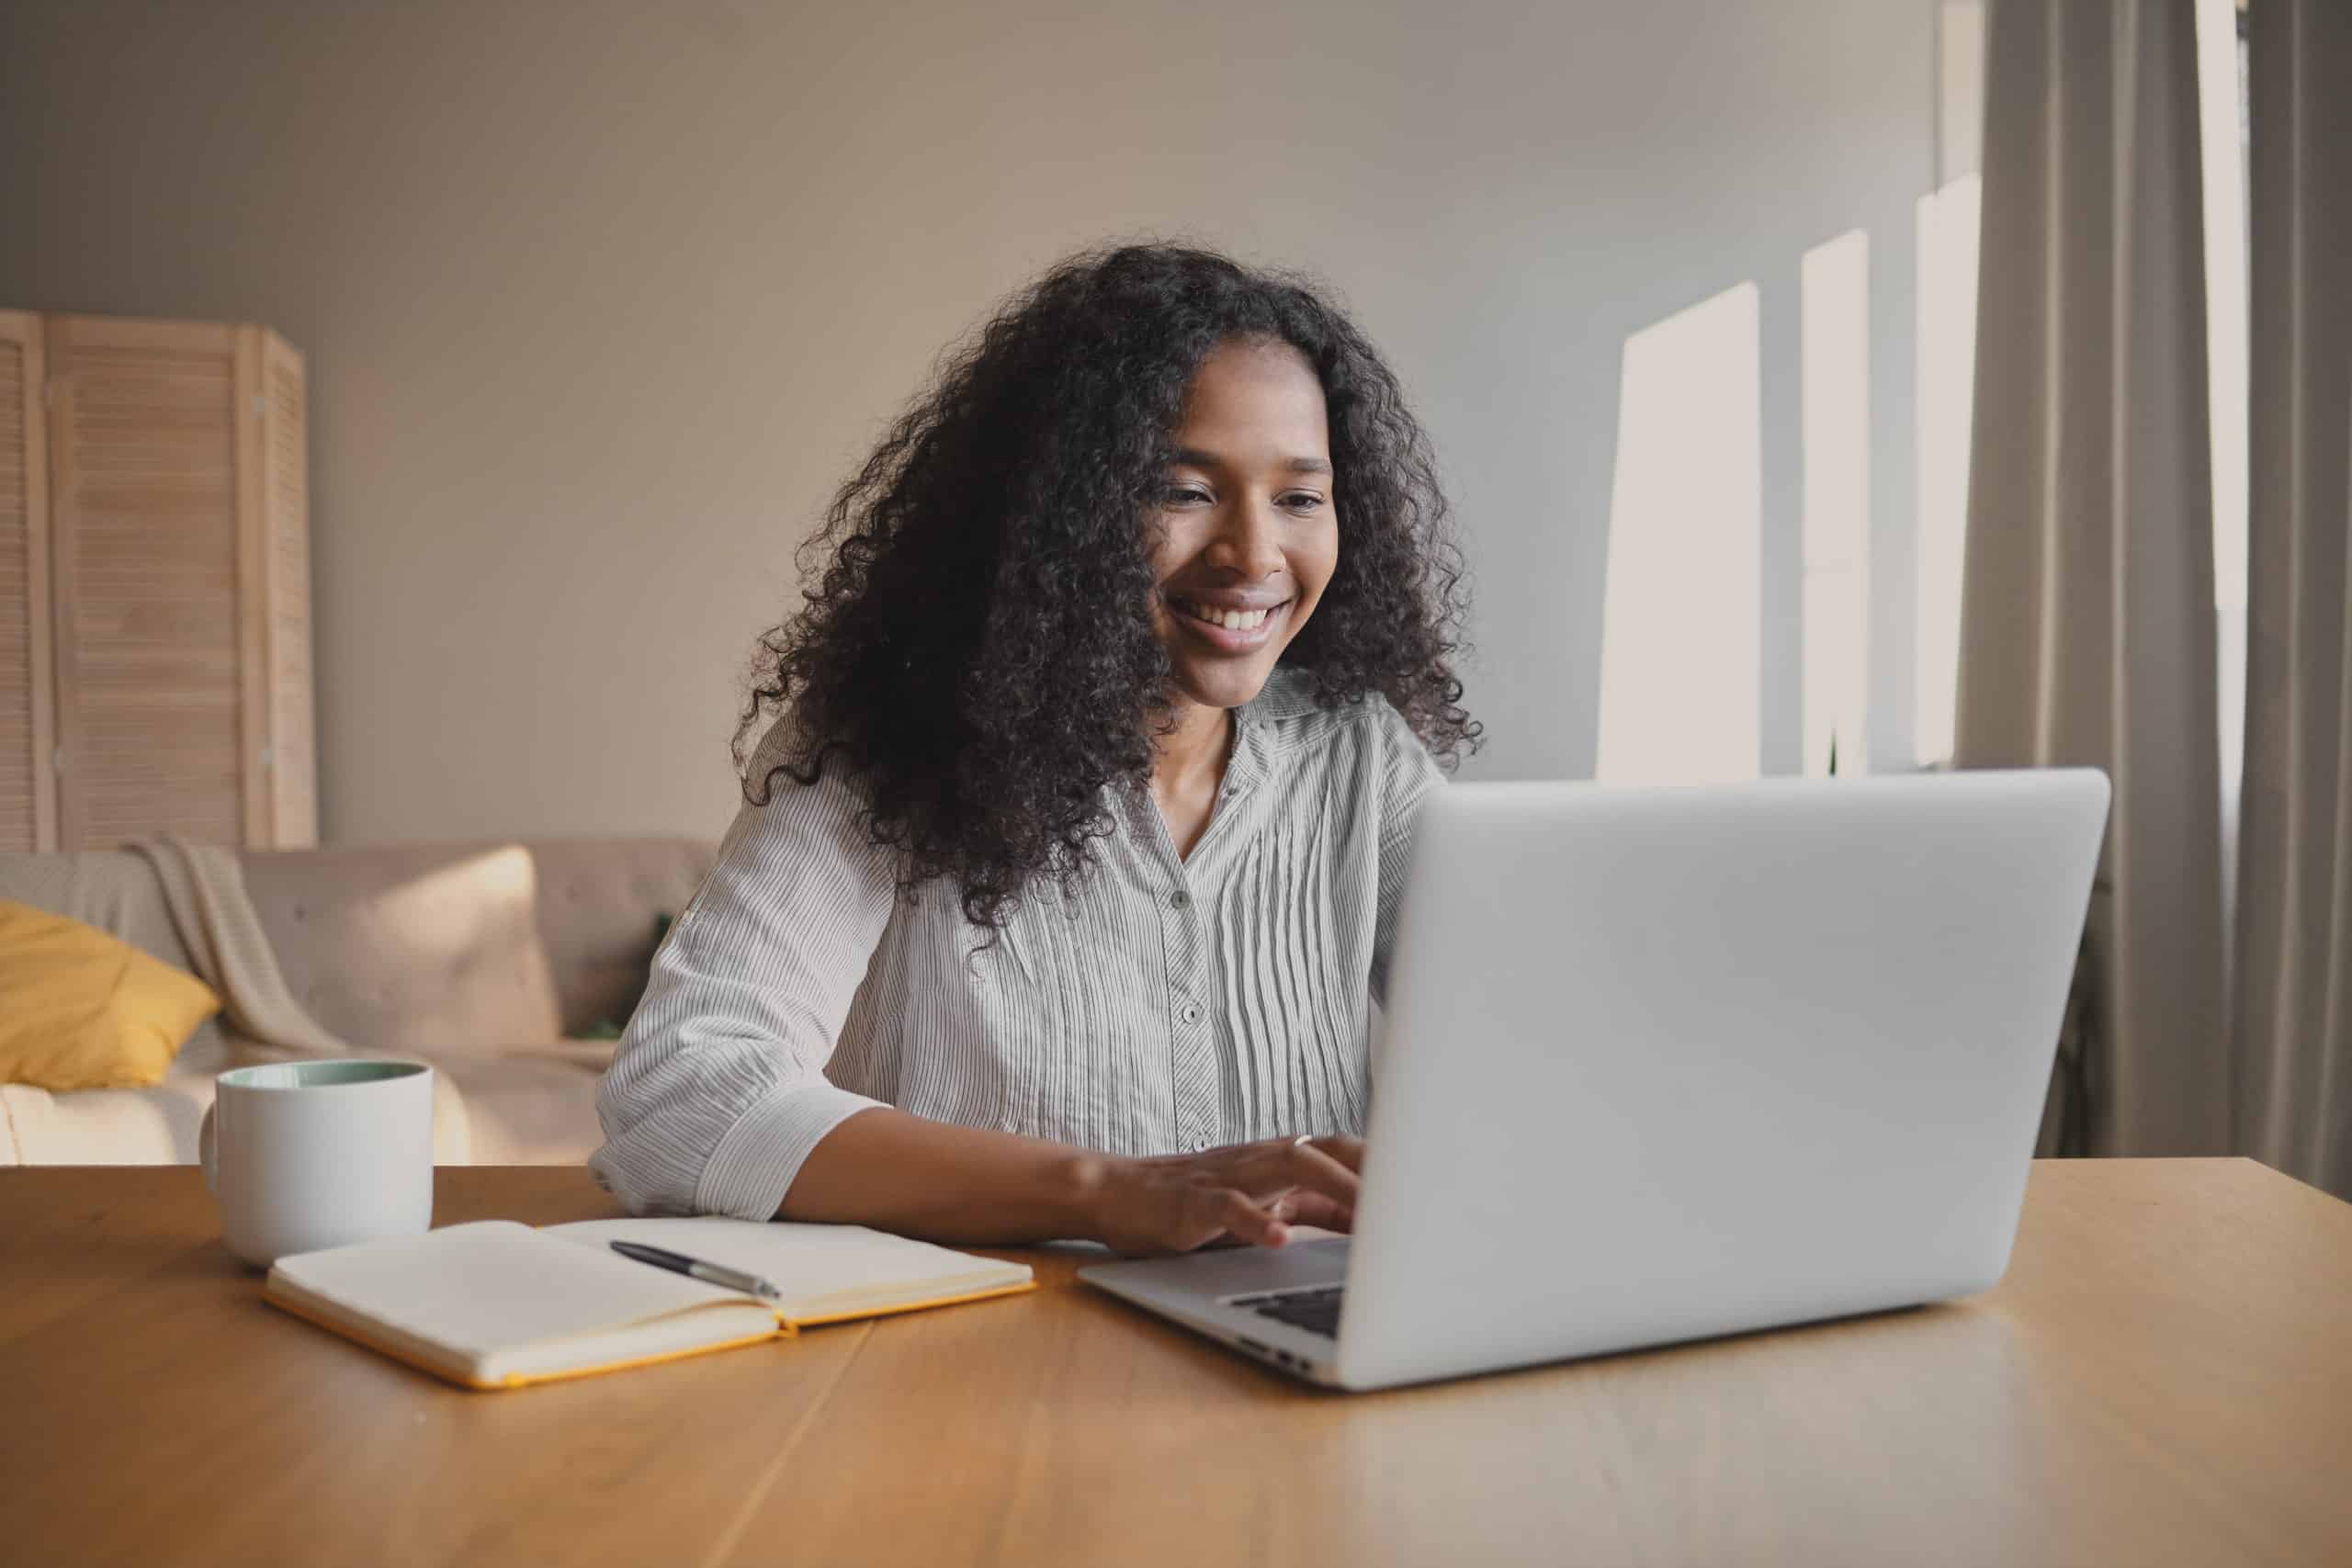 Cheerful woman working on laptop excited for her new IT career